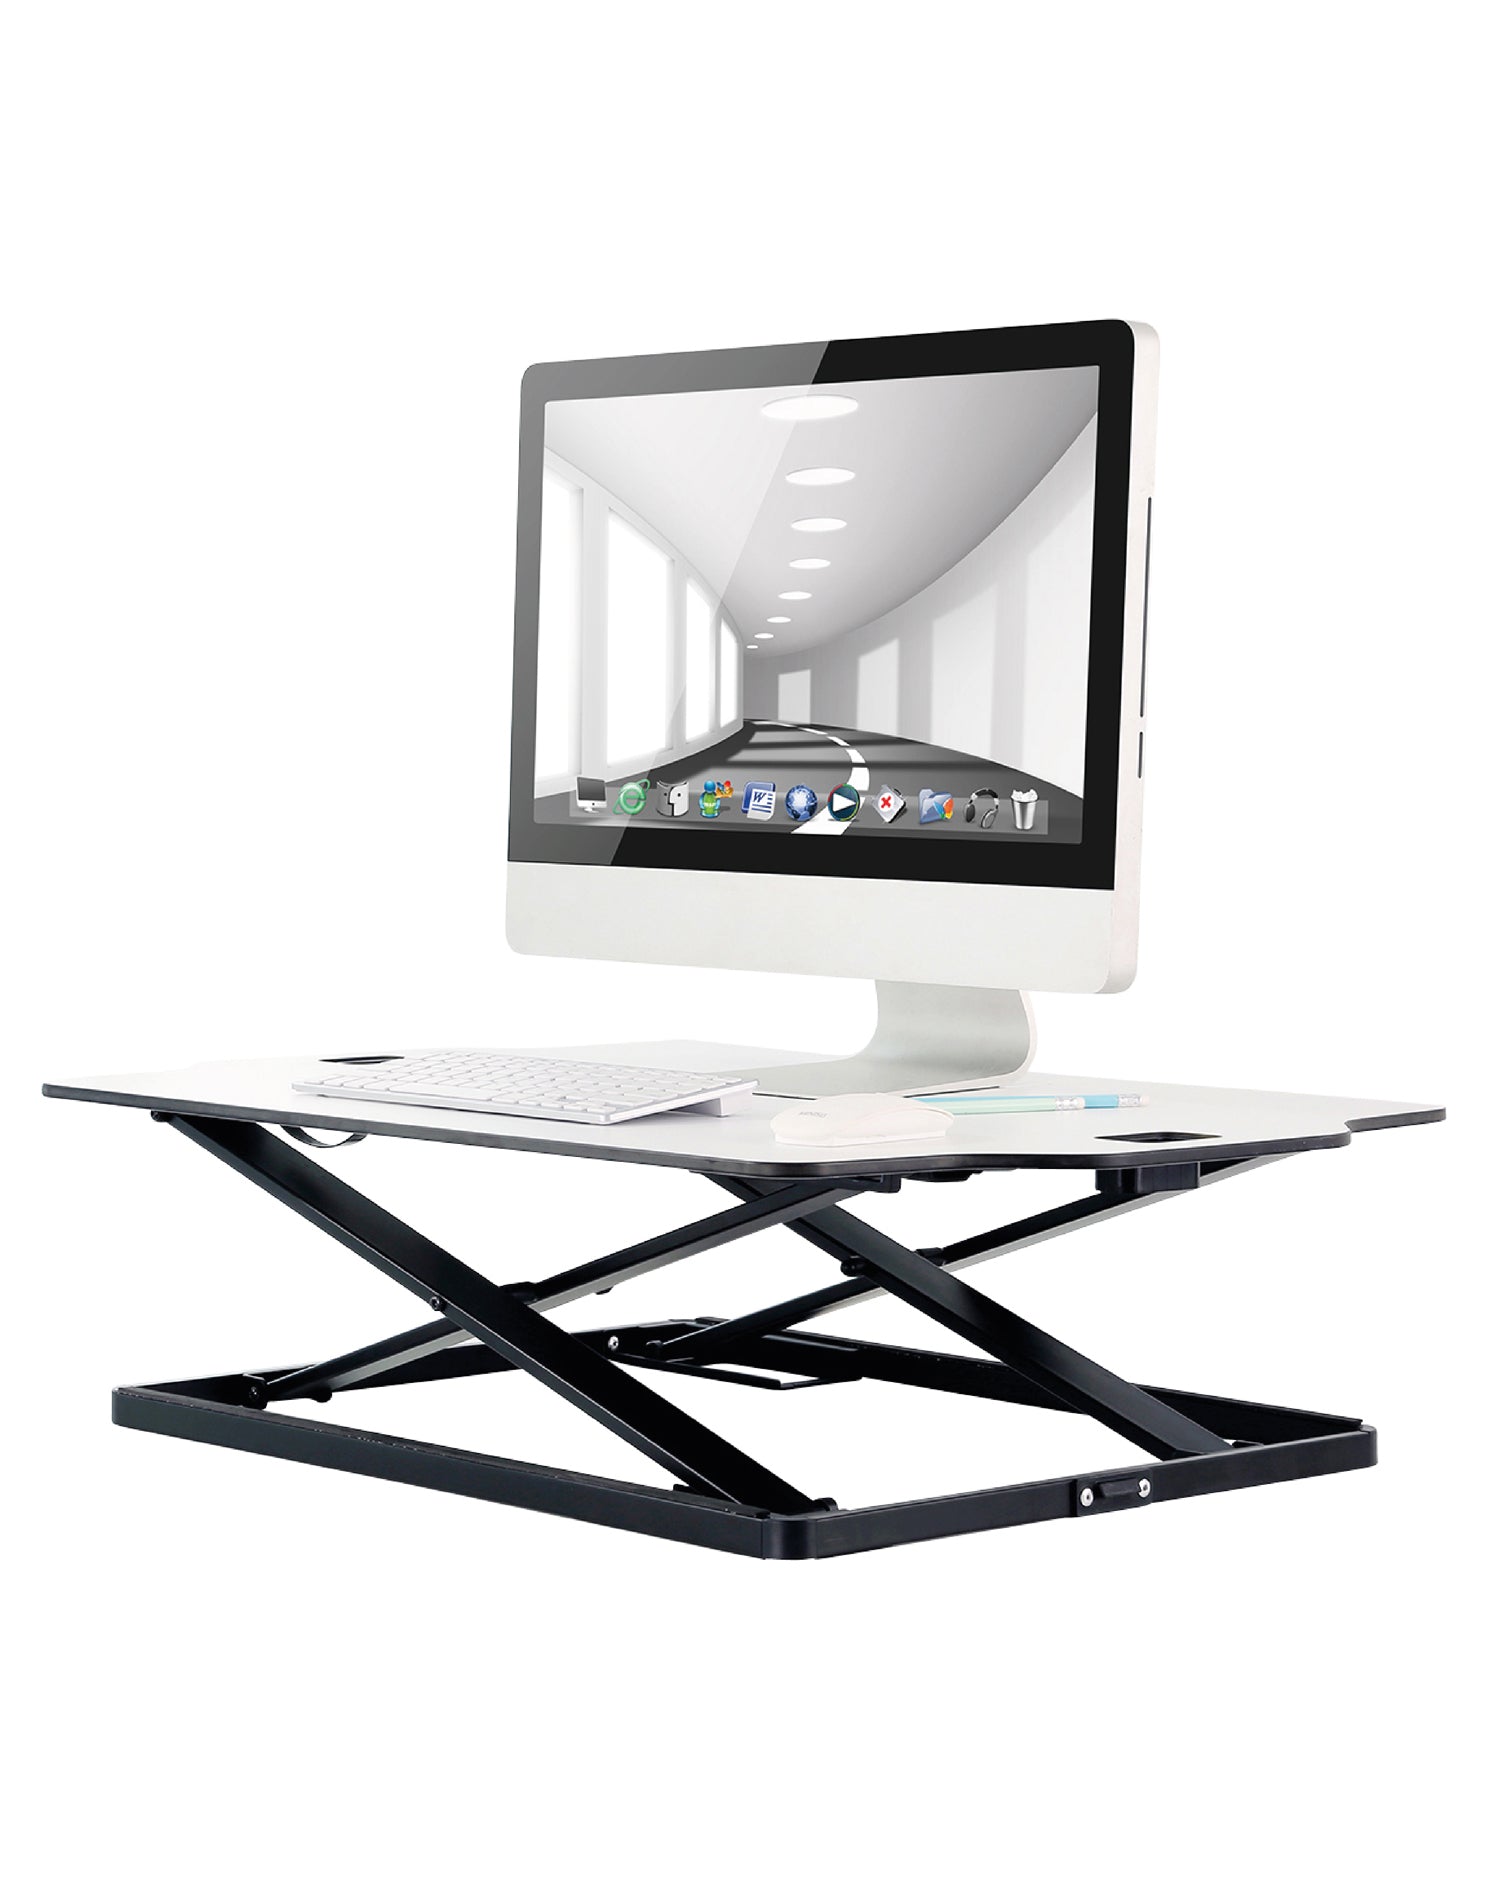 ProperAV Slim Profile Adjustable Stand Up Desk Workstation with 6 Height Settings - White